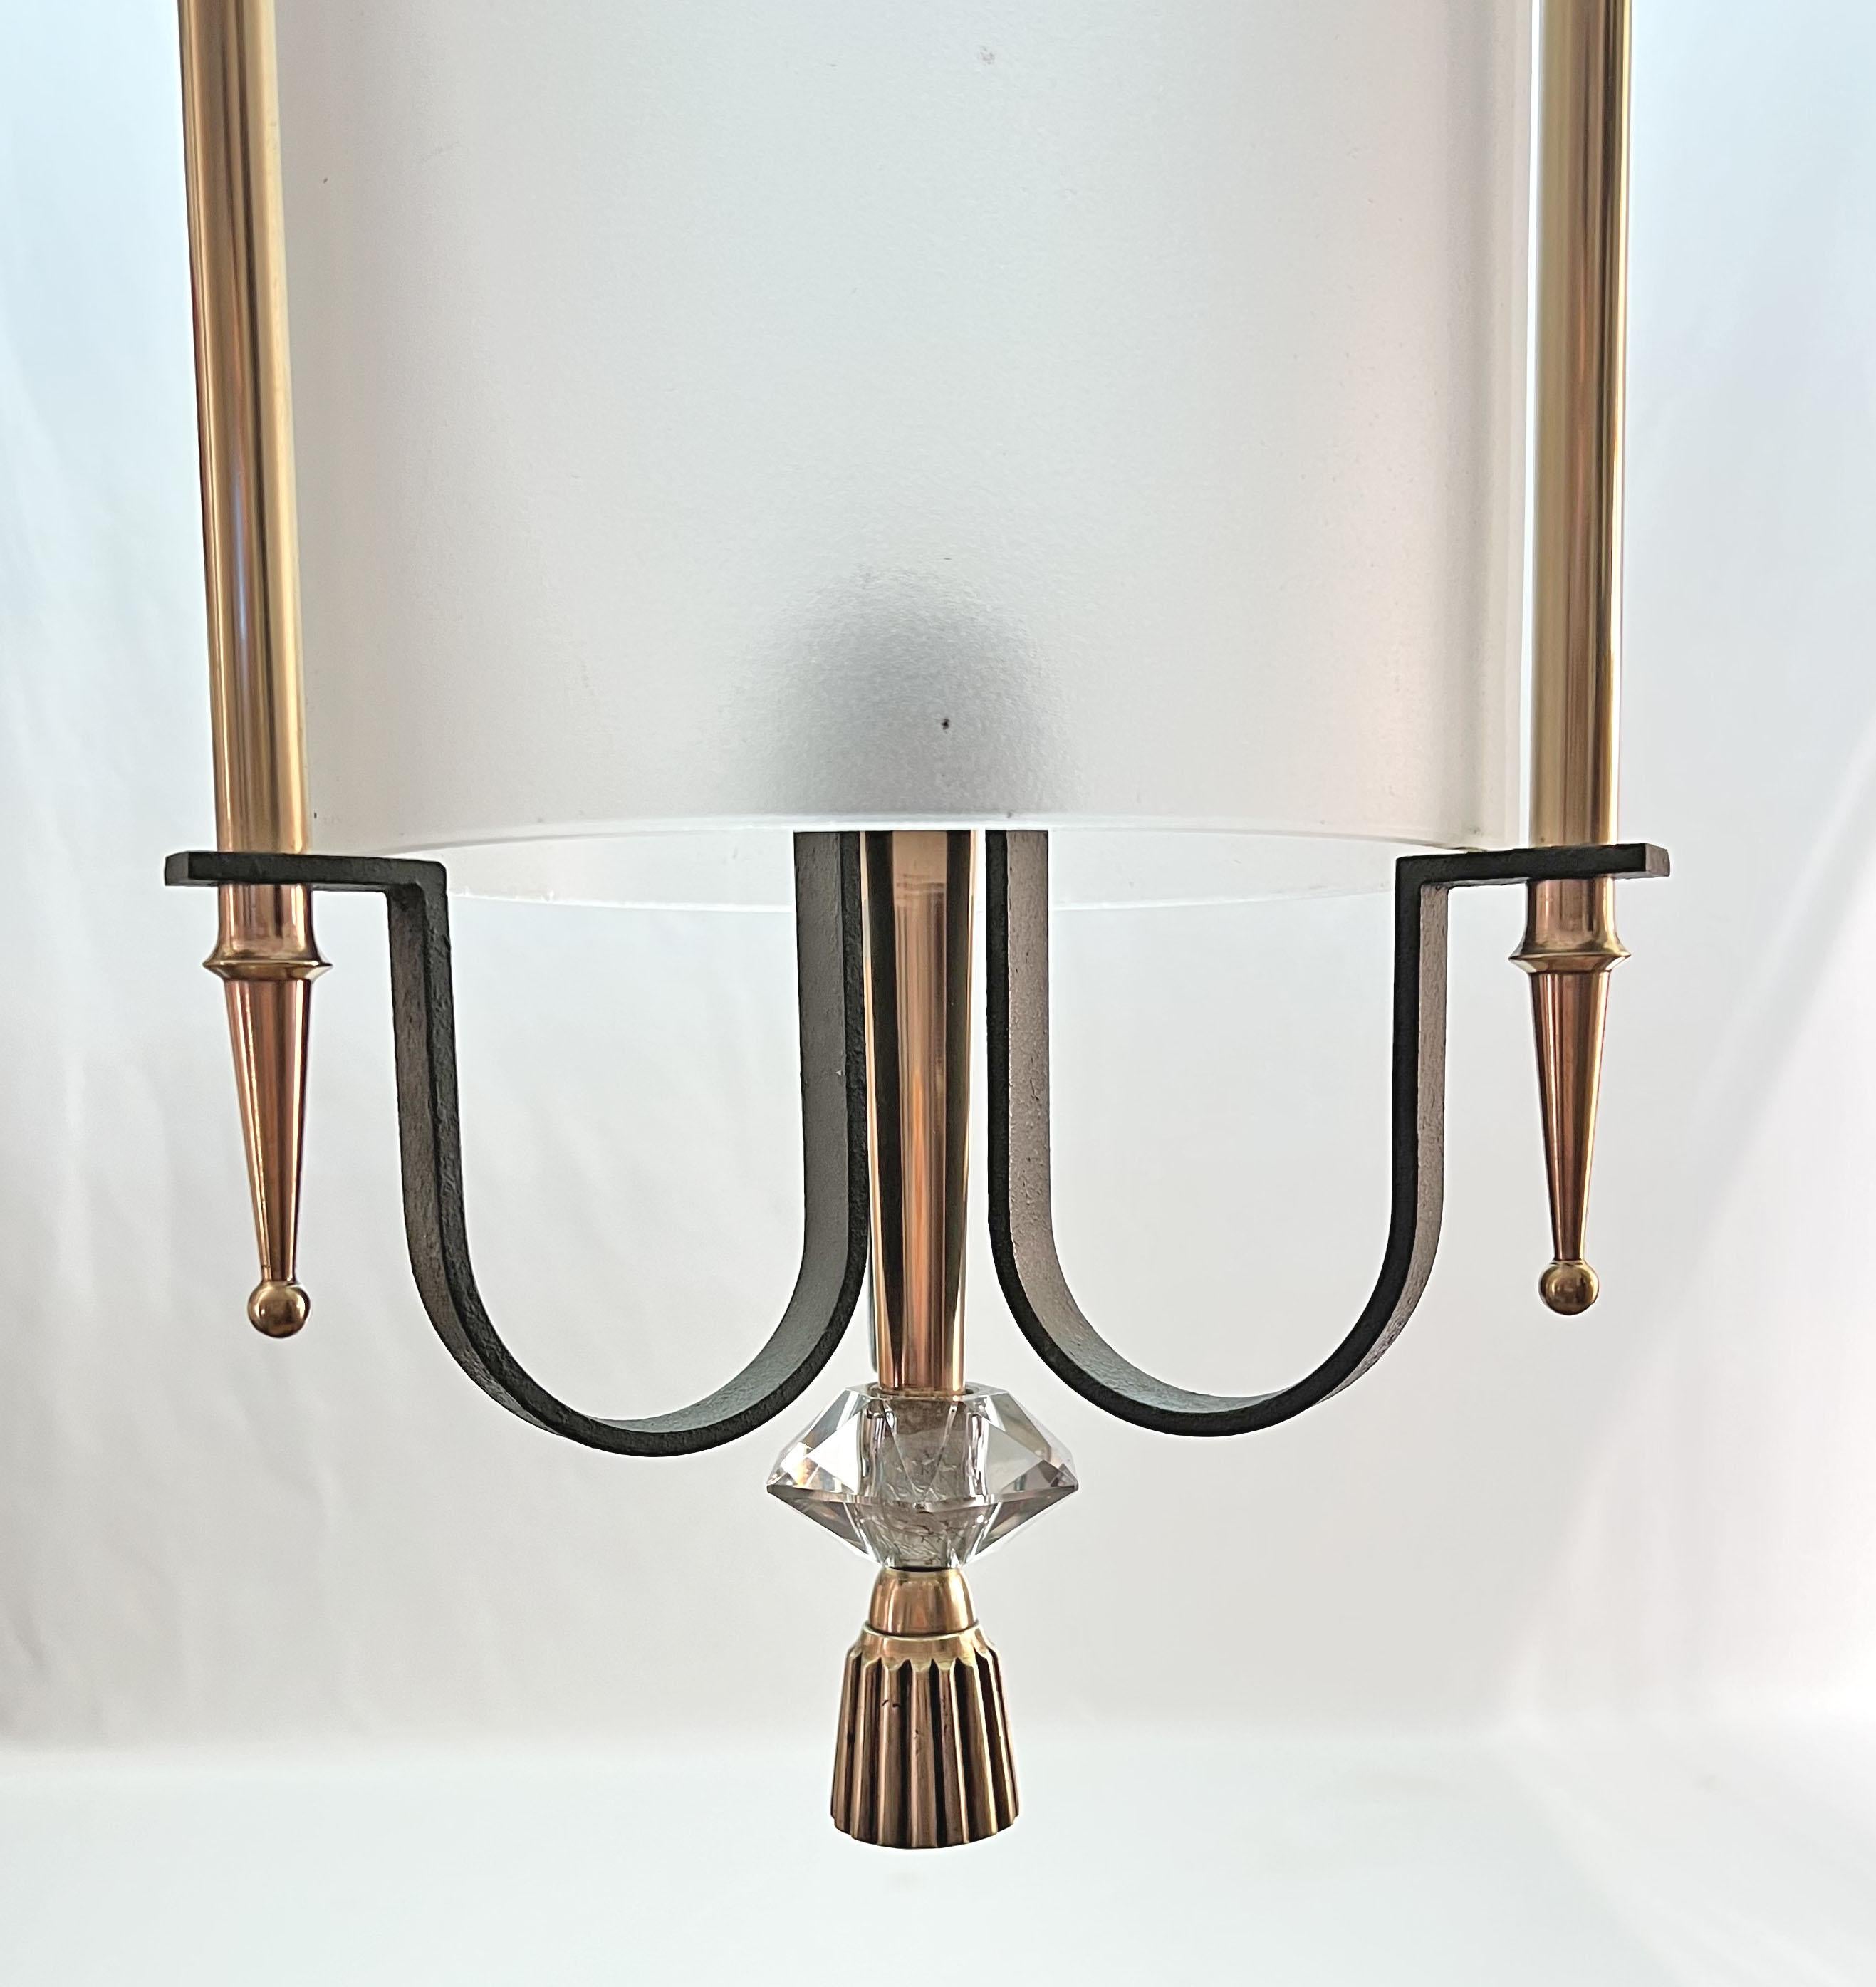 Art Deco Lantern Hanging Light in Wrought Iron and Bronze, 1940s For Sale